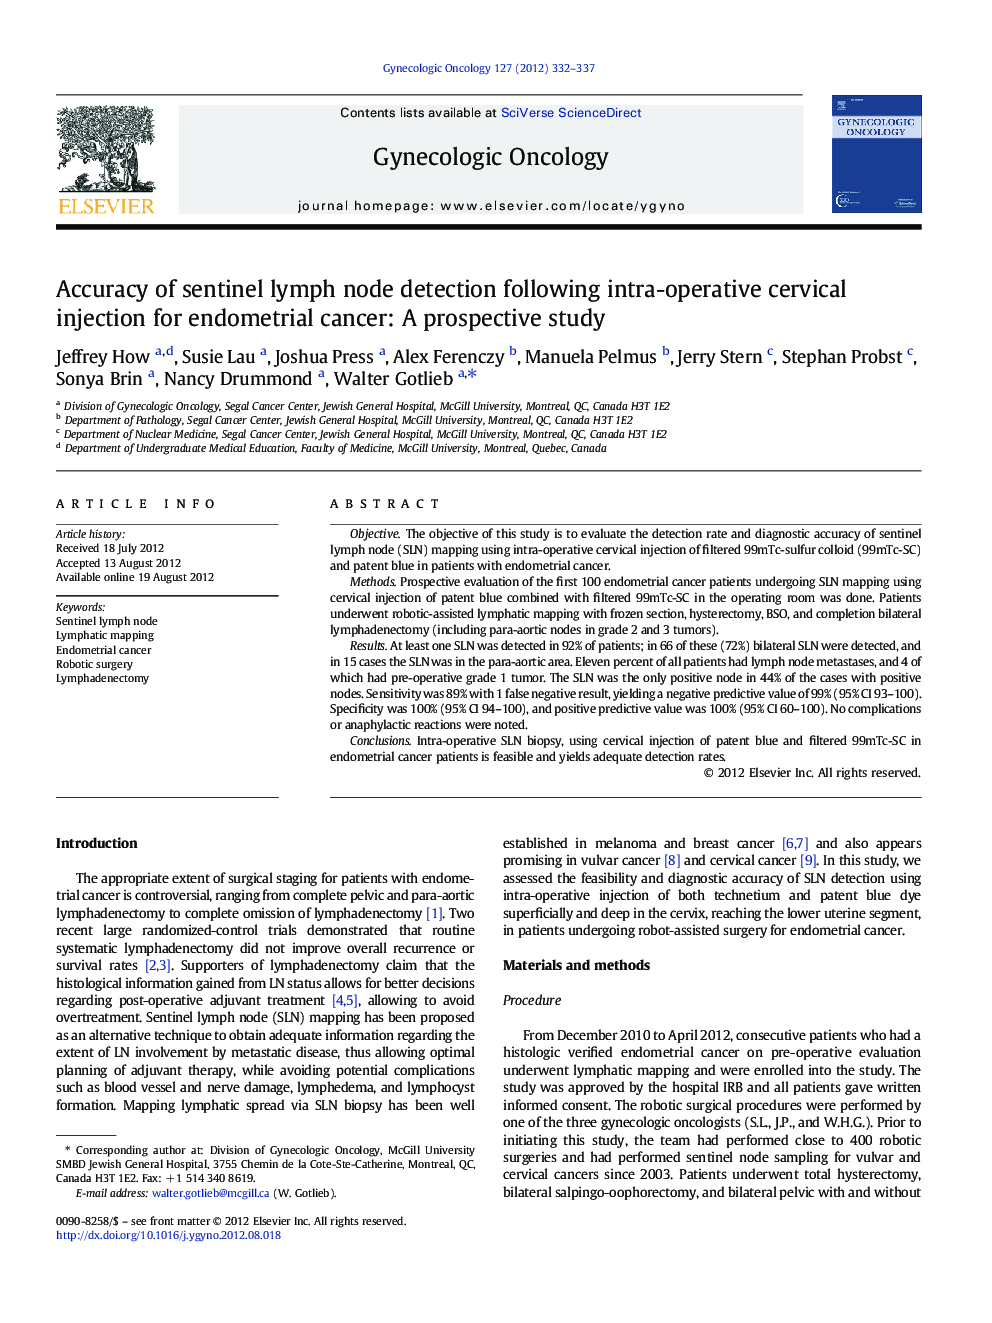 Accuracy of sentinel lymph node detection following intra-operative cervical injection for endometrial cancer: A prospective study